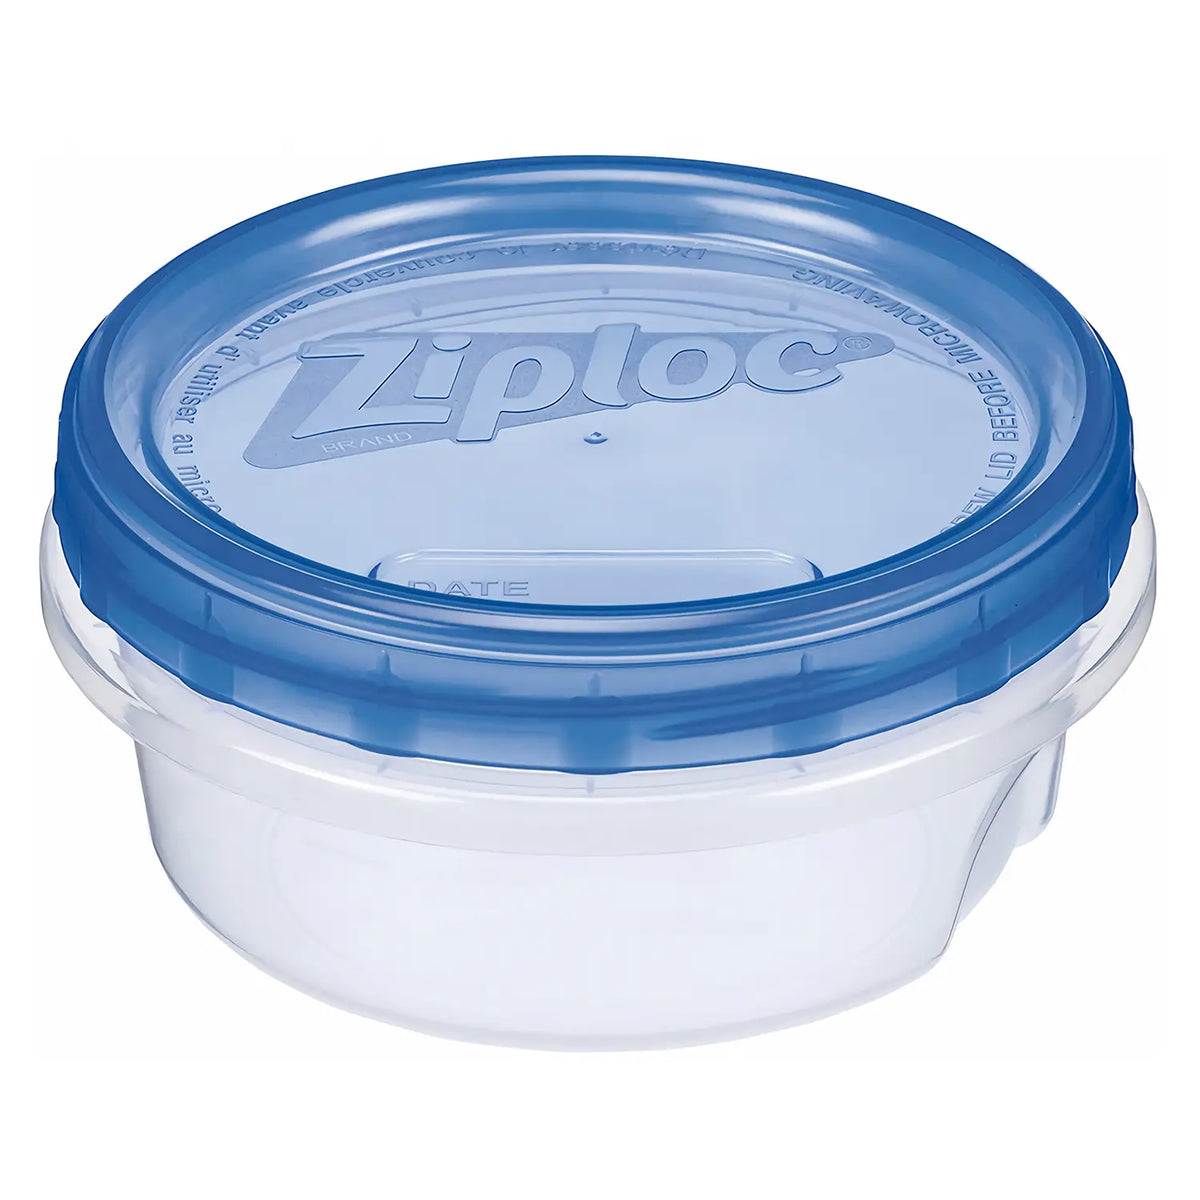 Ziploc Containers & Lids, Small Rectangle, Plastic Containers